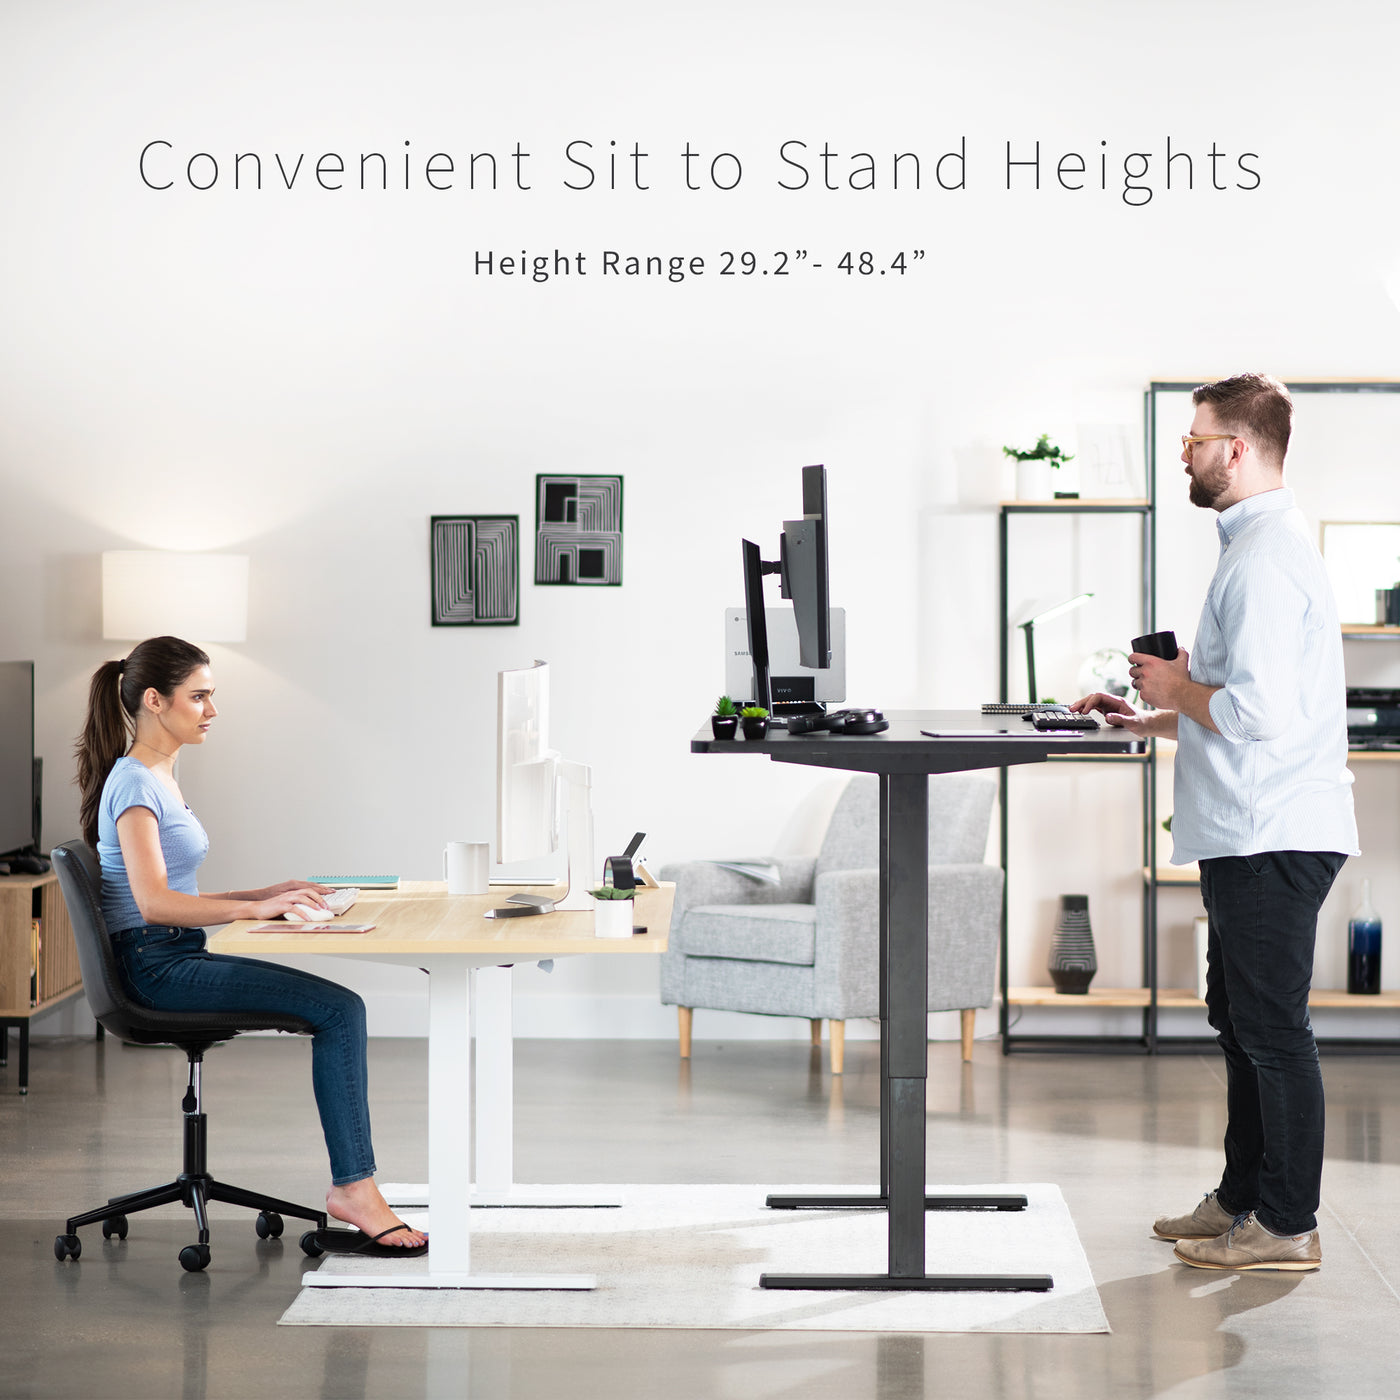 Sizable tabletop surface area to elevate all office equipment and accessories to make your space yours.